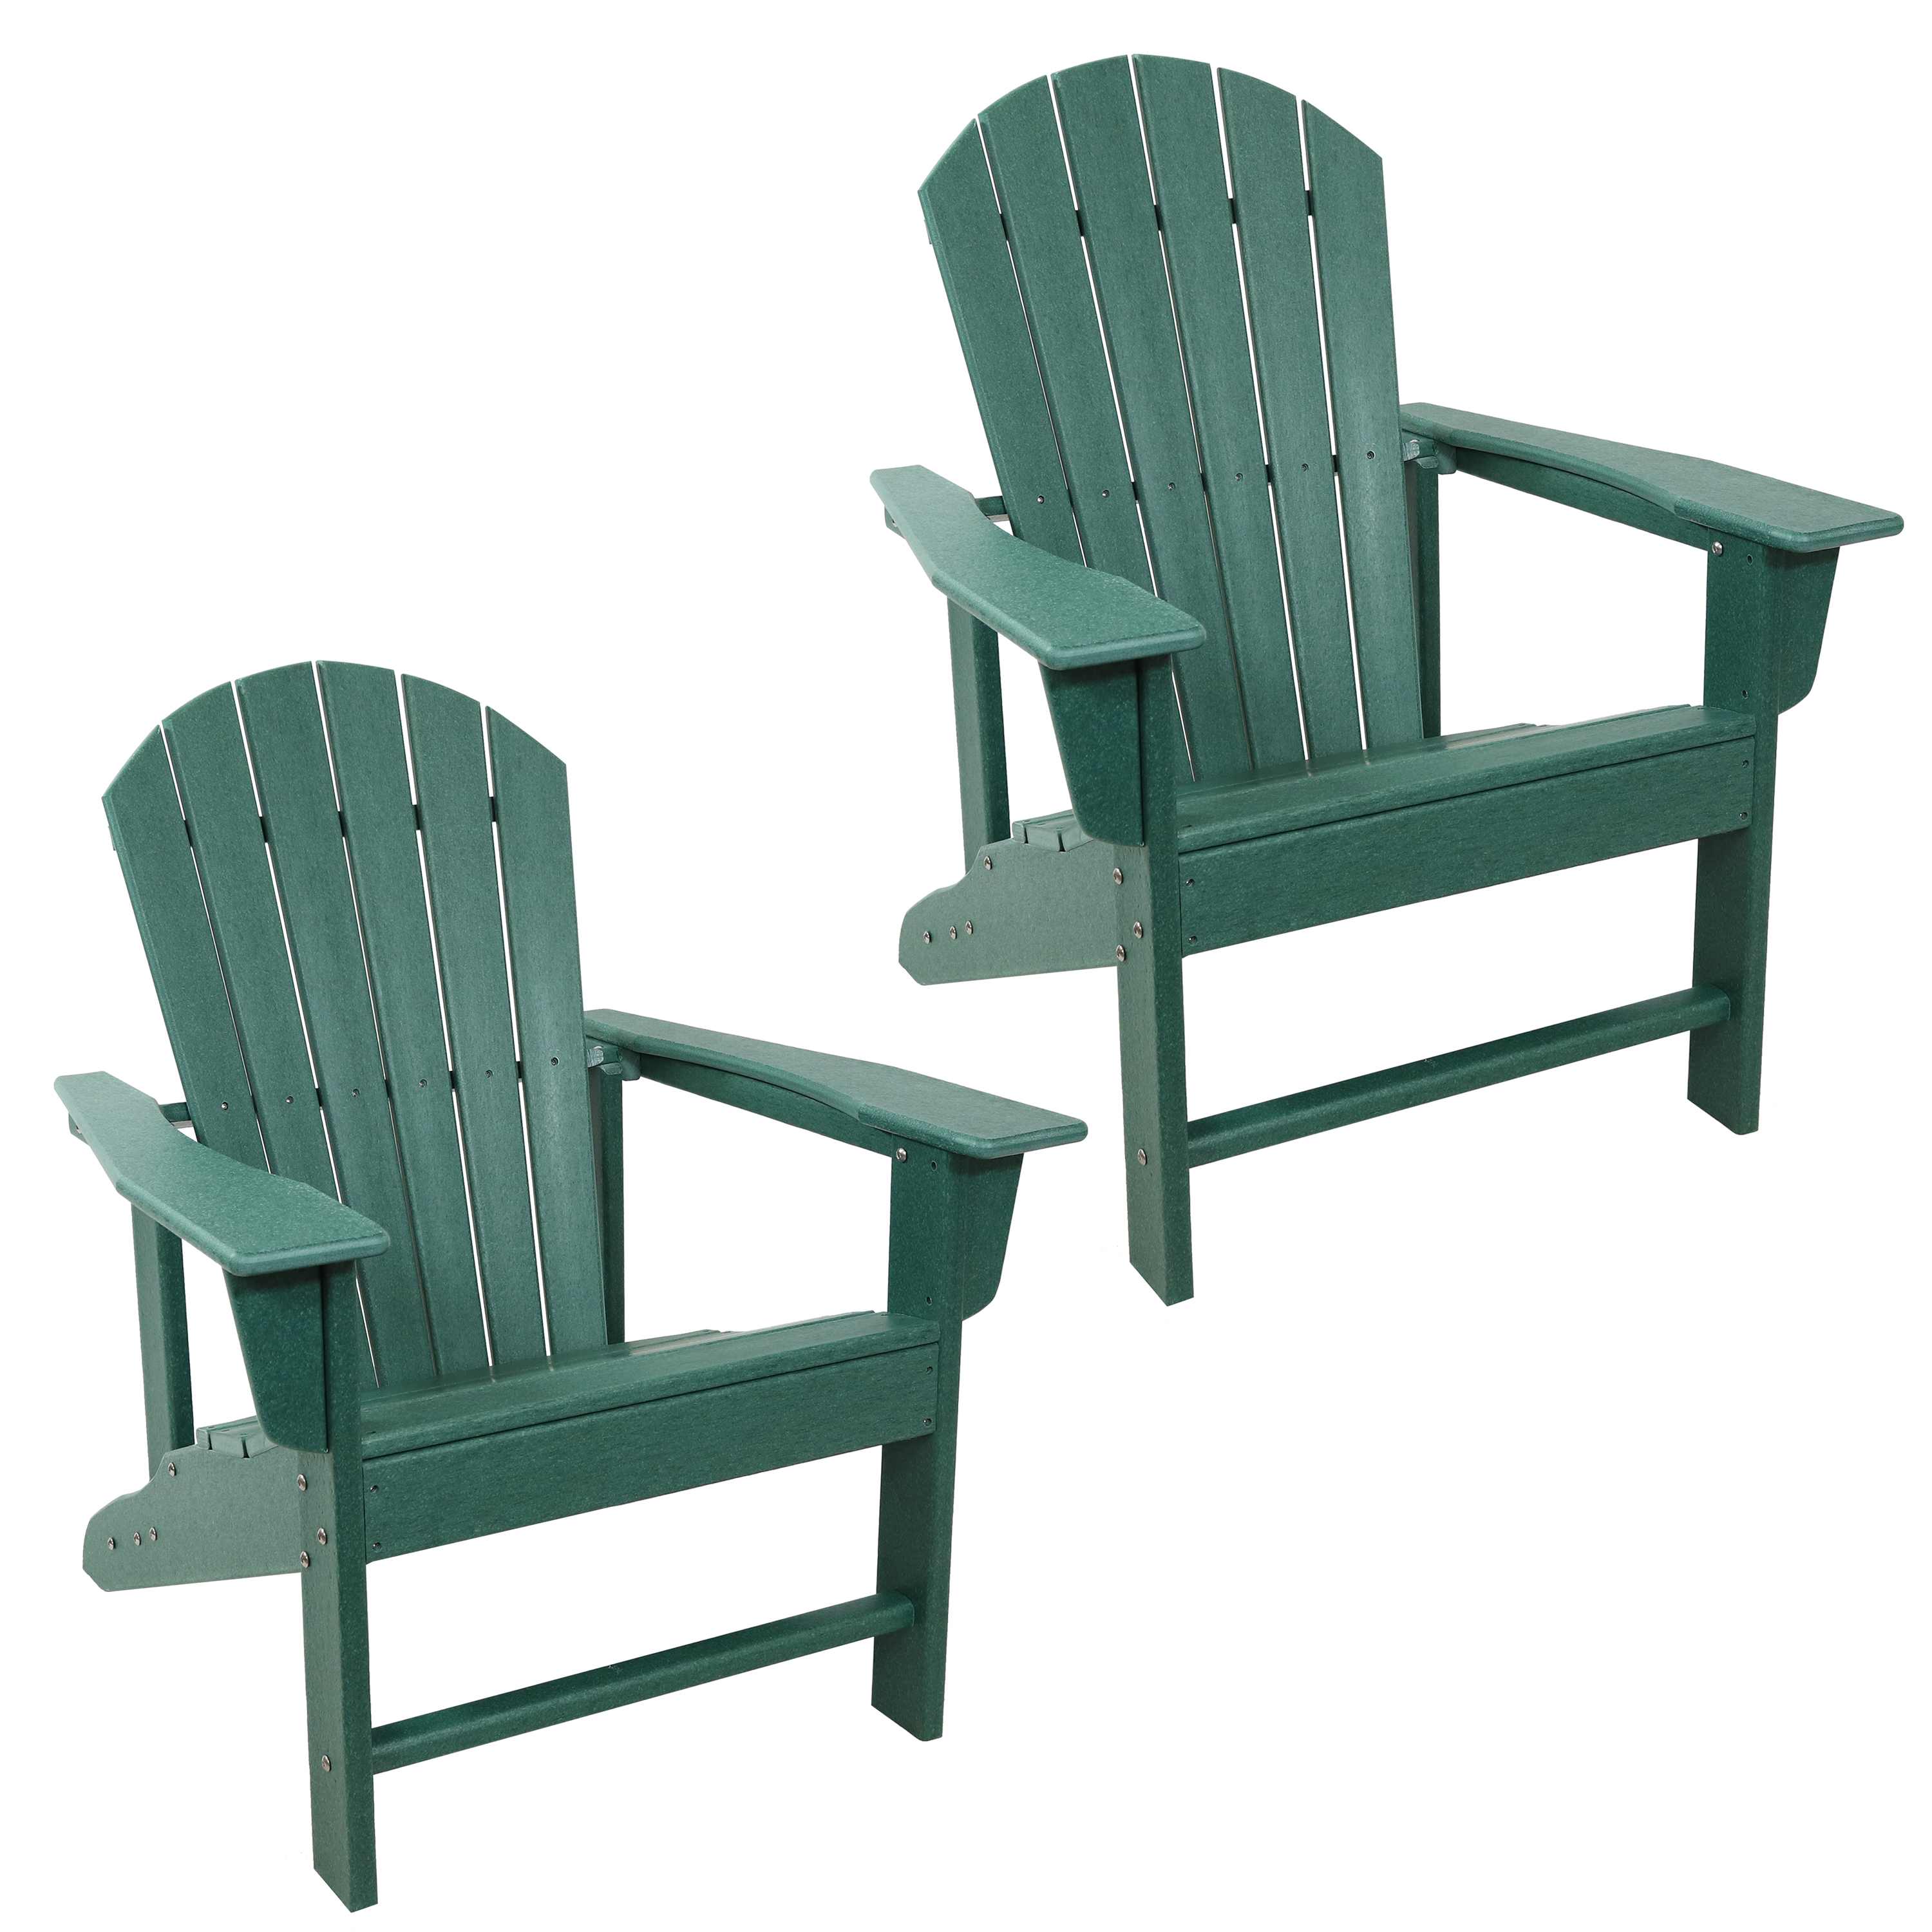 Upright HDPE Raised Outdoor Adirondack Chair - Set of 2